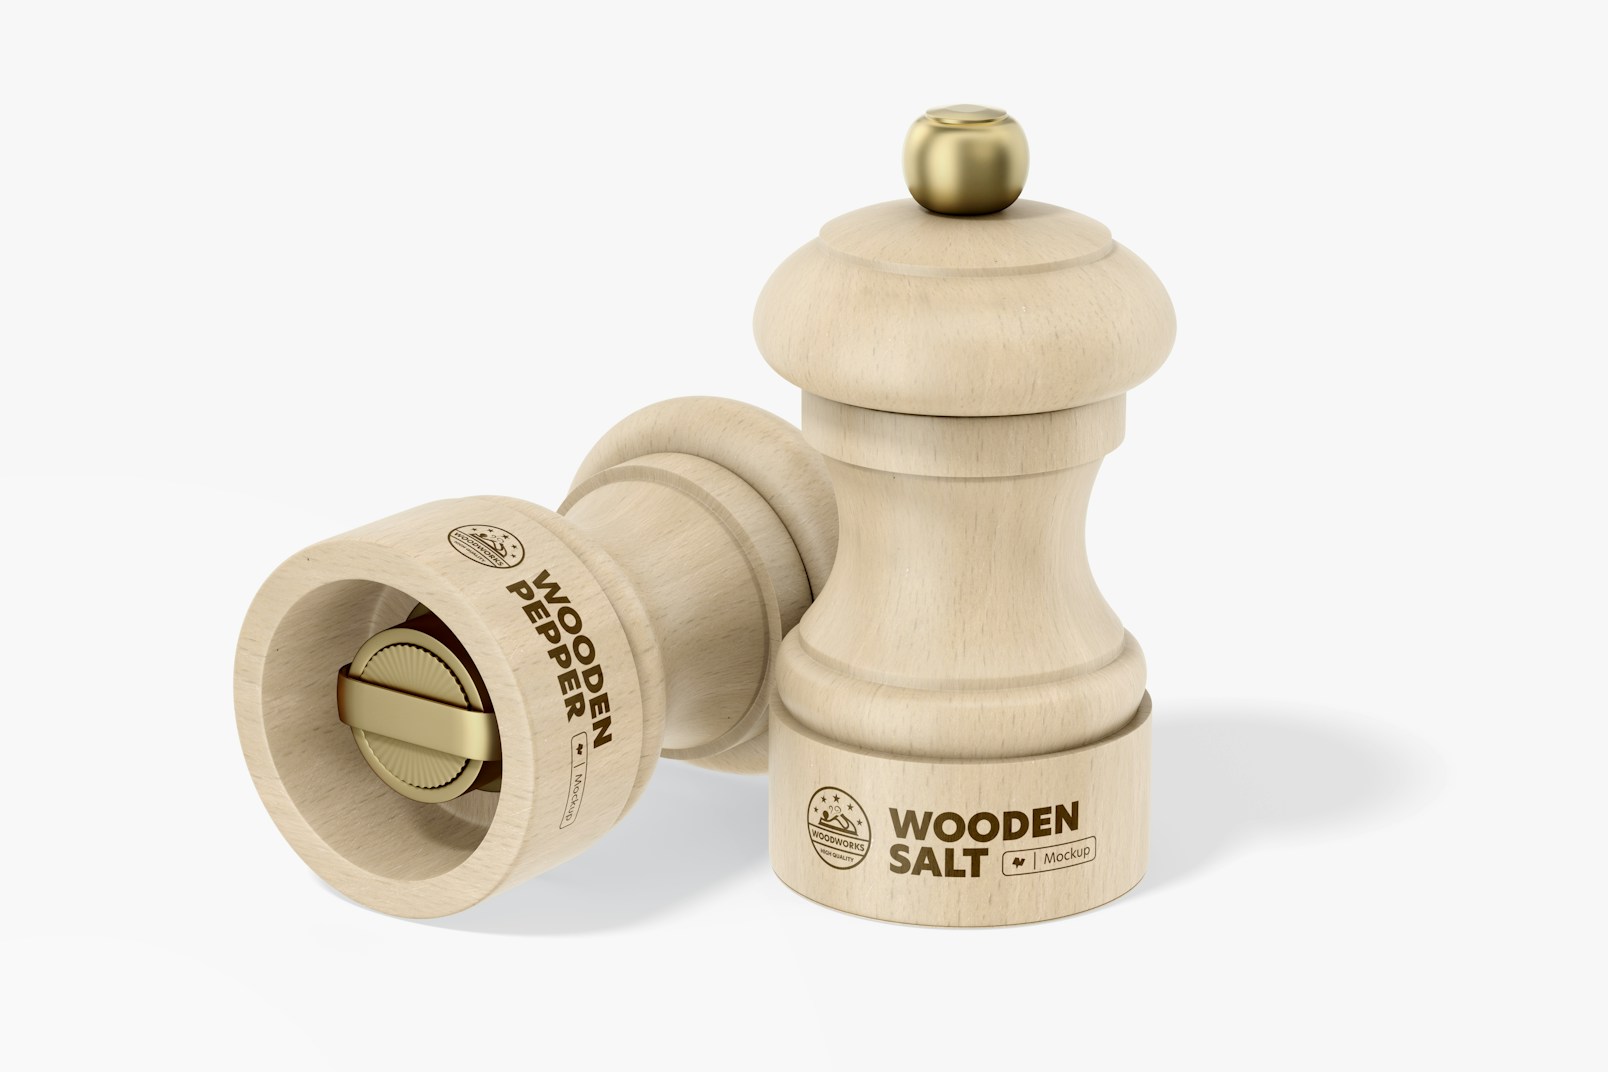 Wooden Salt and Pepper Grinder Mockup, Dropped and Standing